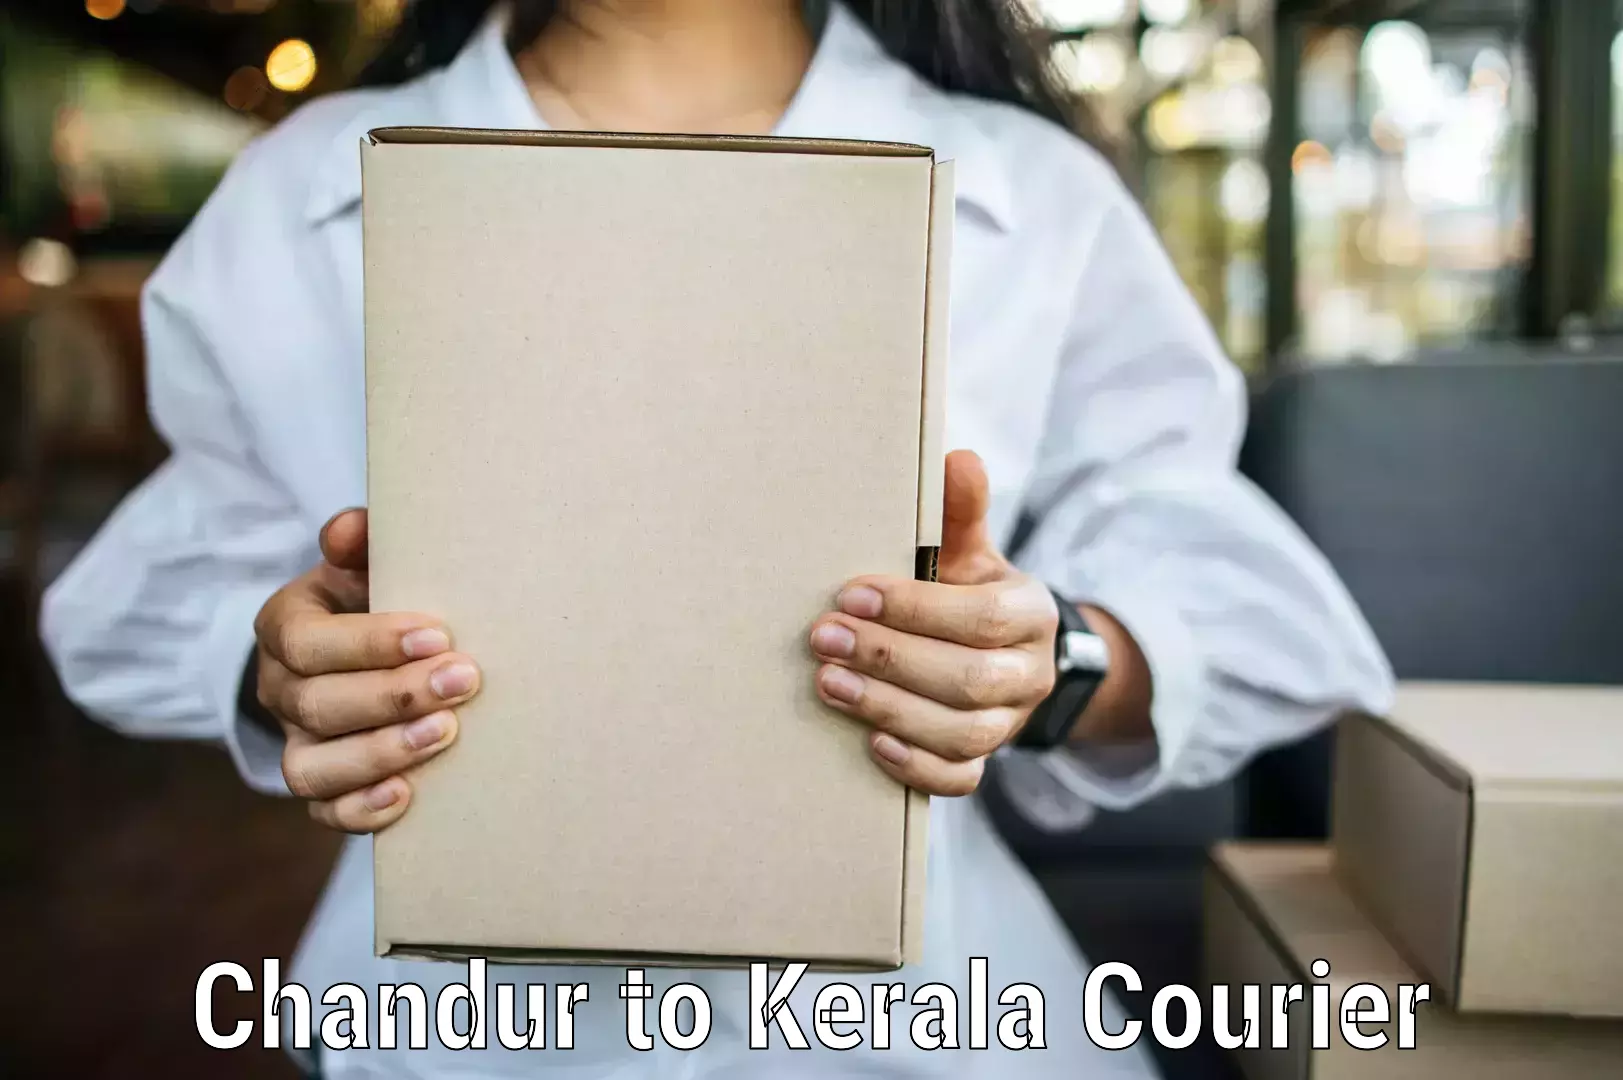 Courier service partnerships Chandur to Balussery